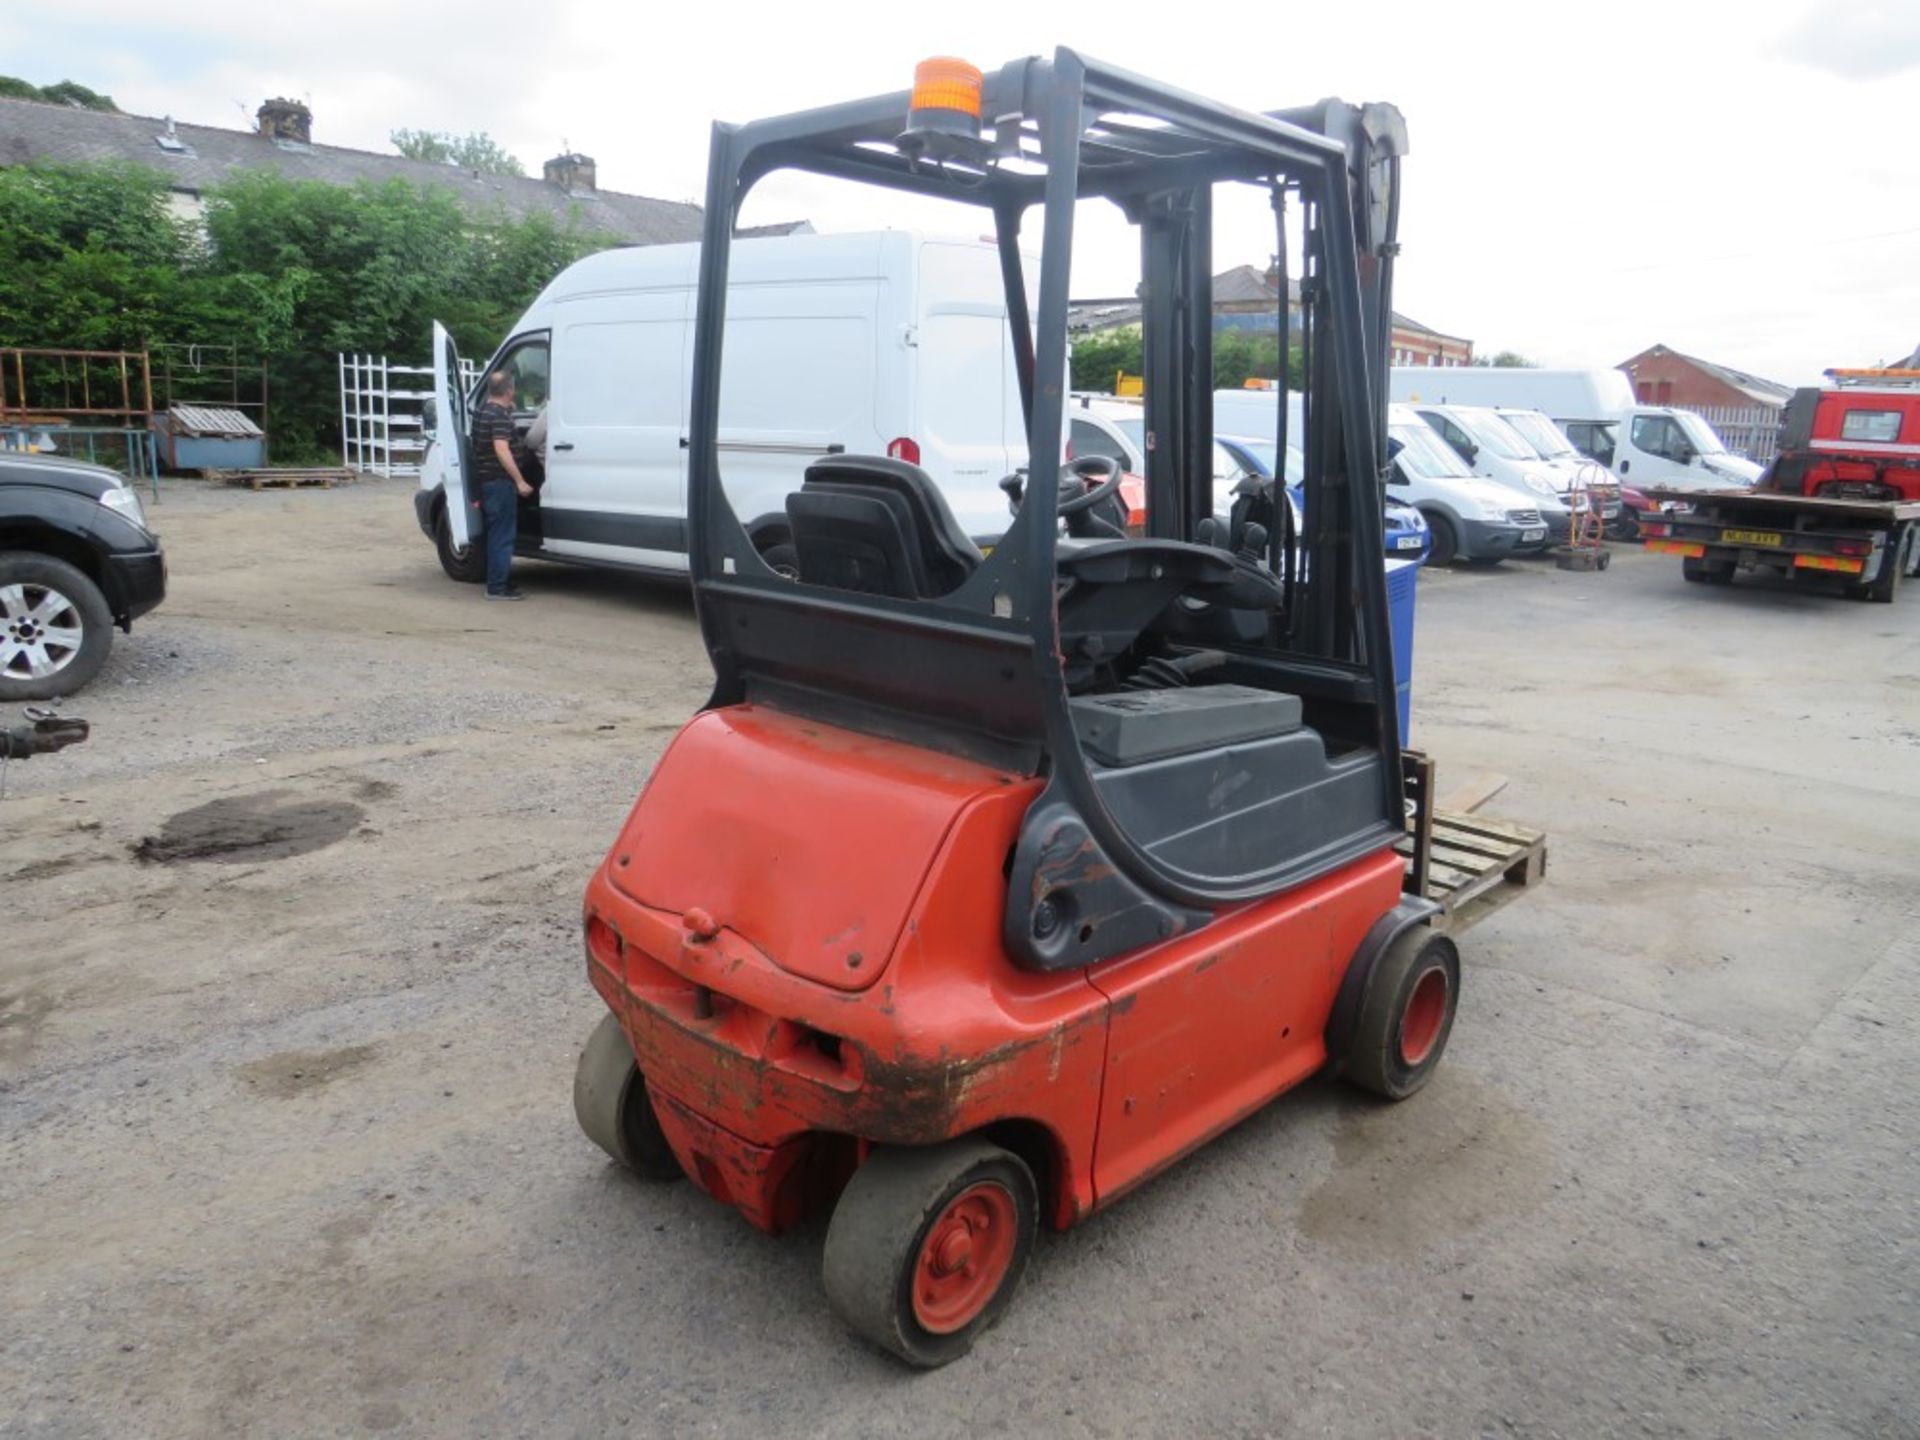 2001 LINDE E18 ELECTRIC FORK LIFT C/W BRAND NEW CHARGER, 14873 HOURS [NO VAT] - Image 4 of 7